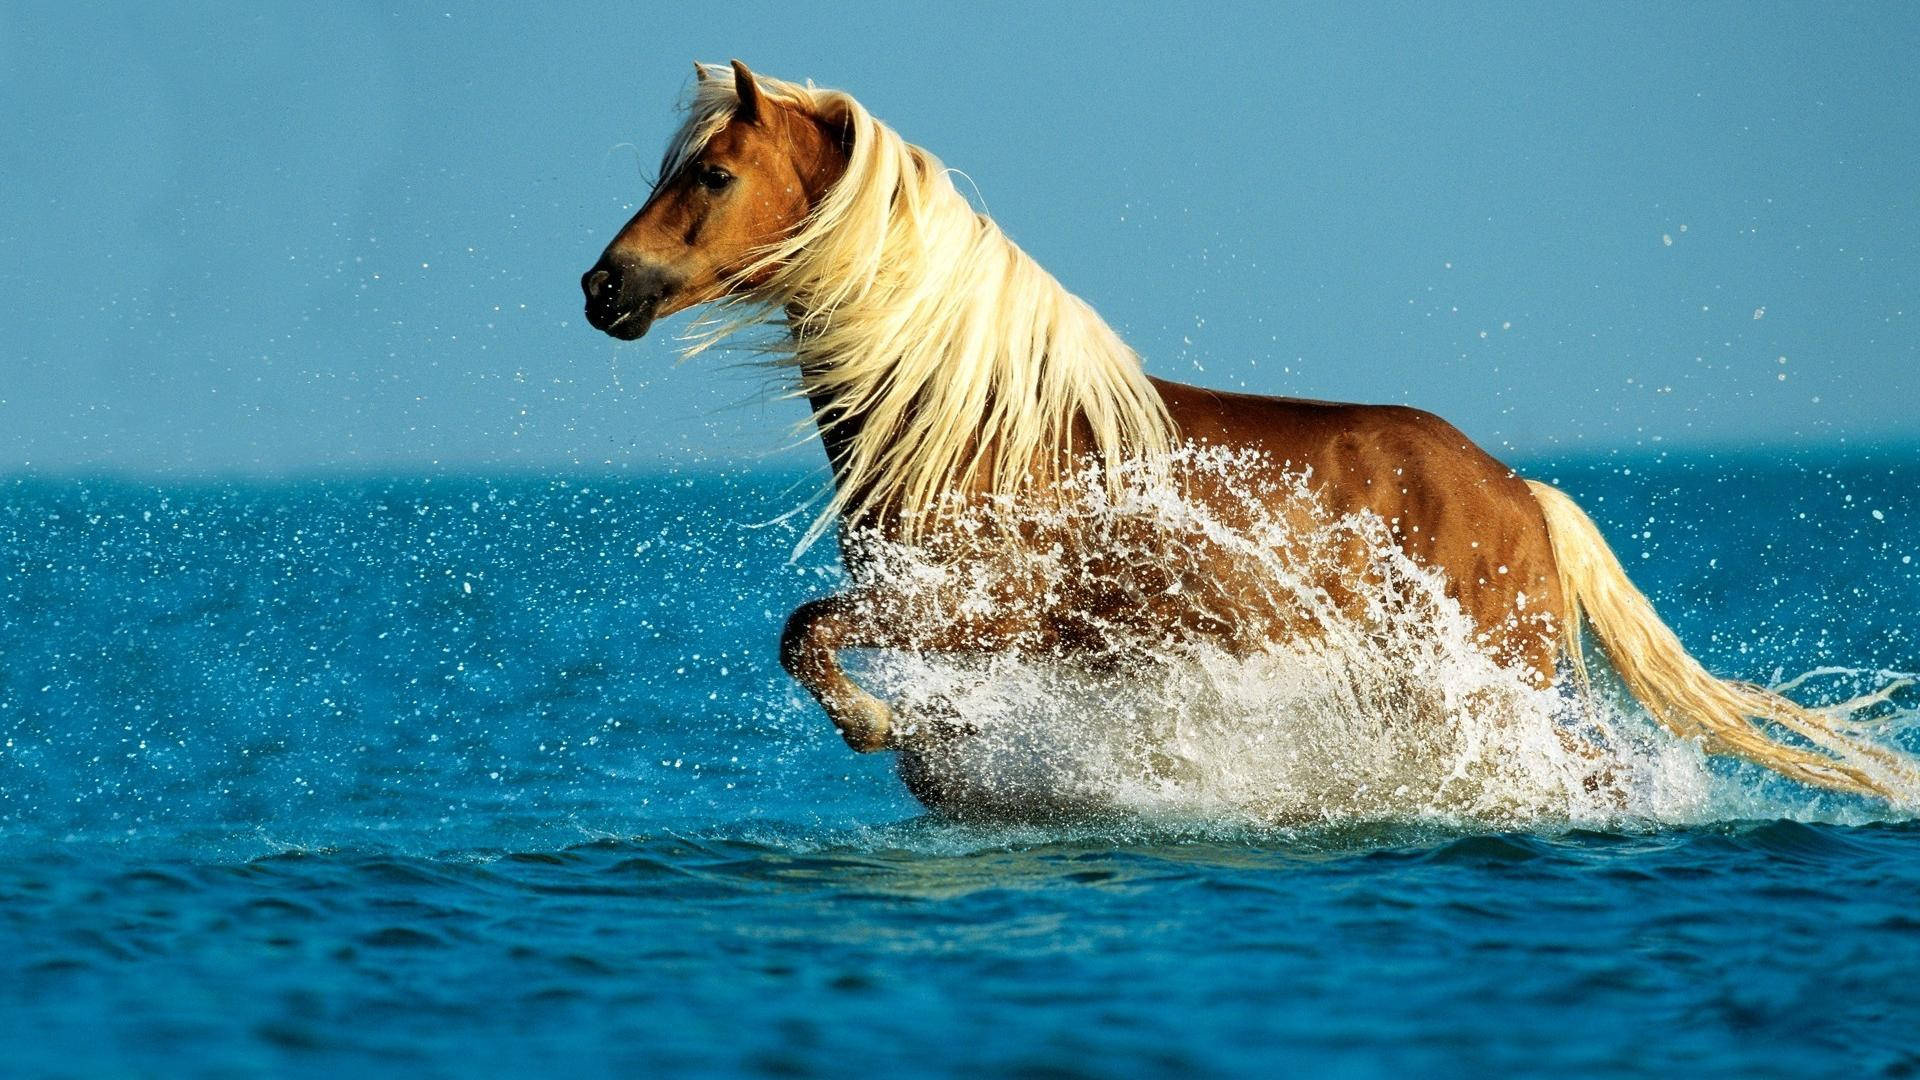 Cute Horse On The Water Background